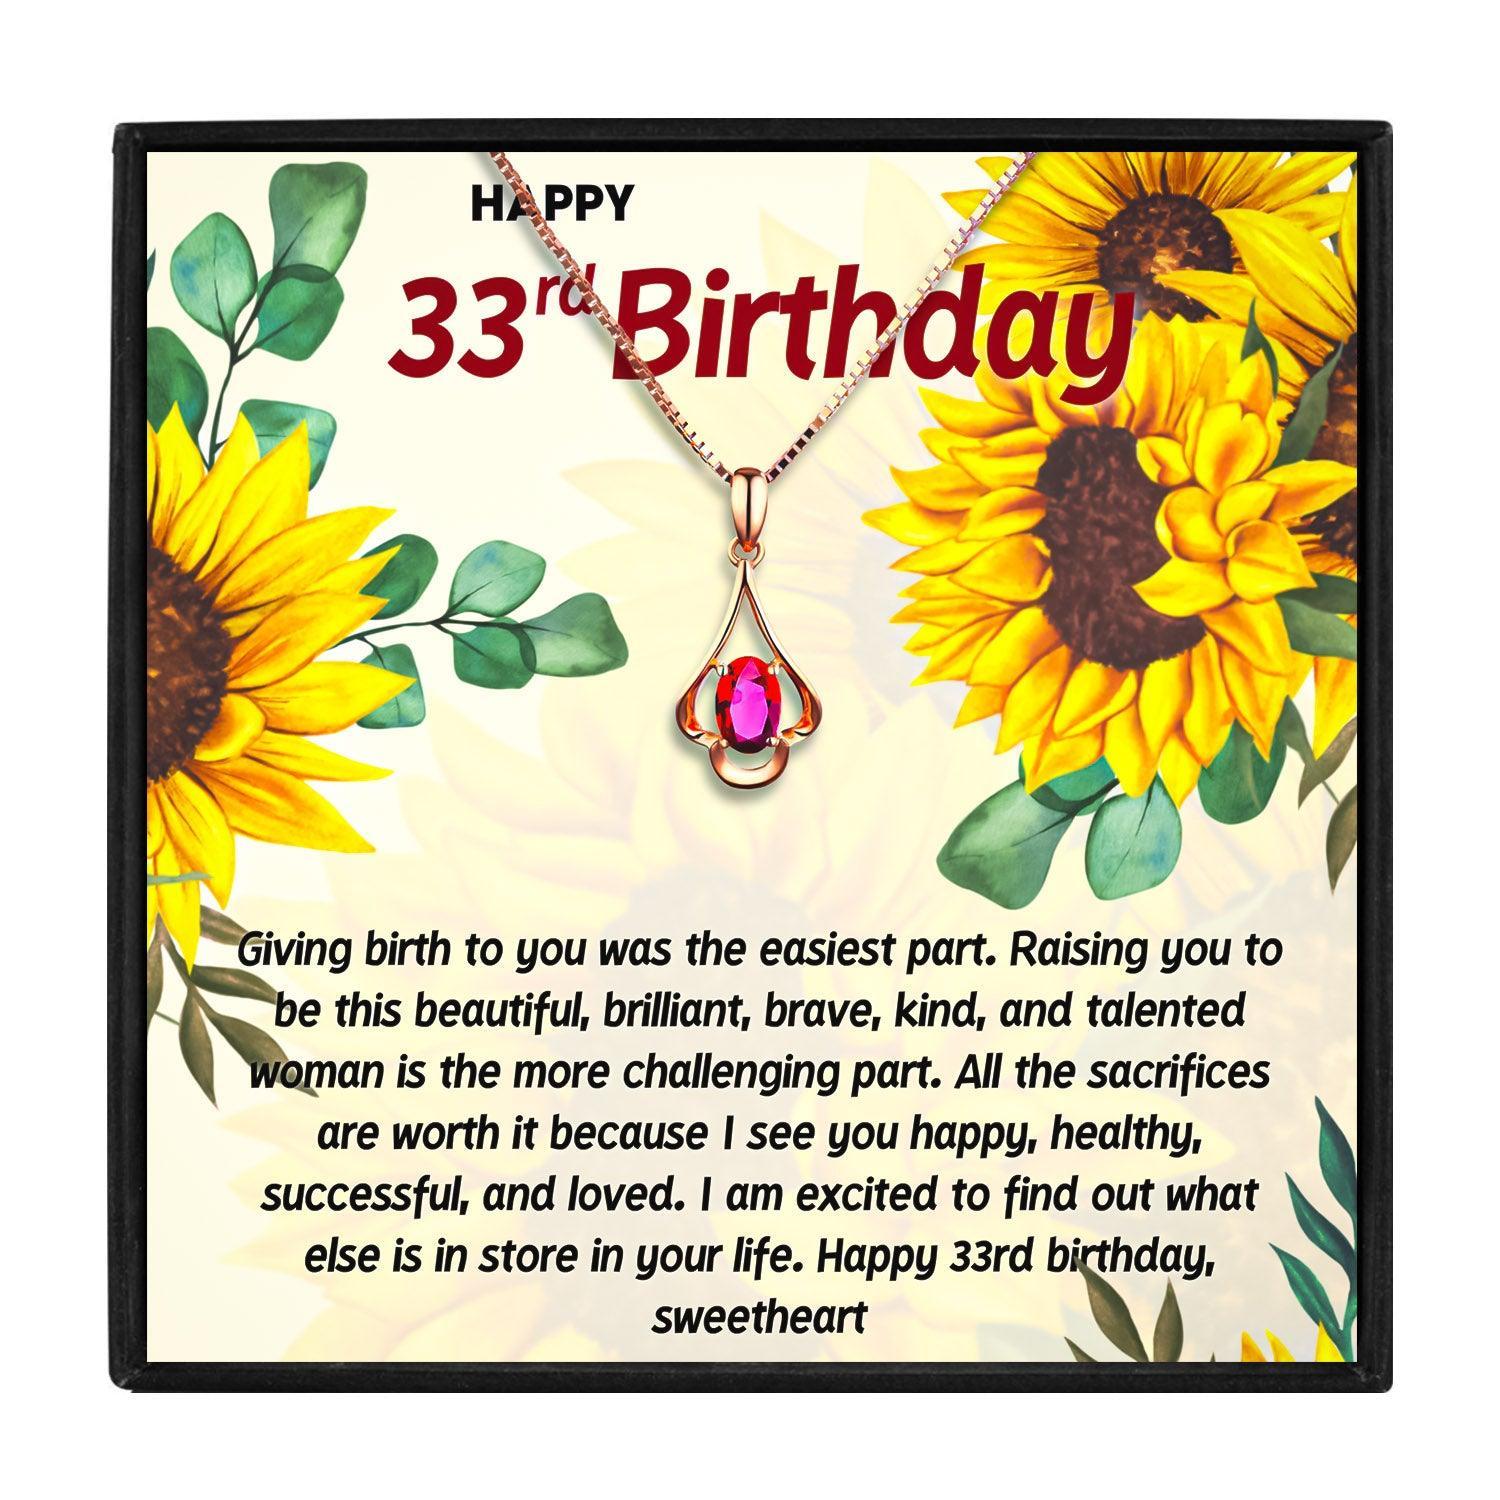 33rd Birthday Gifts for 33 Year Old Women in 2023 | 33rd Birthday Gifts for 33 Year Old Women - undefined | 33 birthday ideas for her, 33rd birthday gift ideas for her, 33rd birthday present ideas, birthday ideas for 33 | From Hunny Life | hunnylife.com